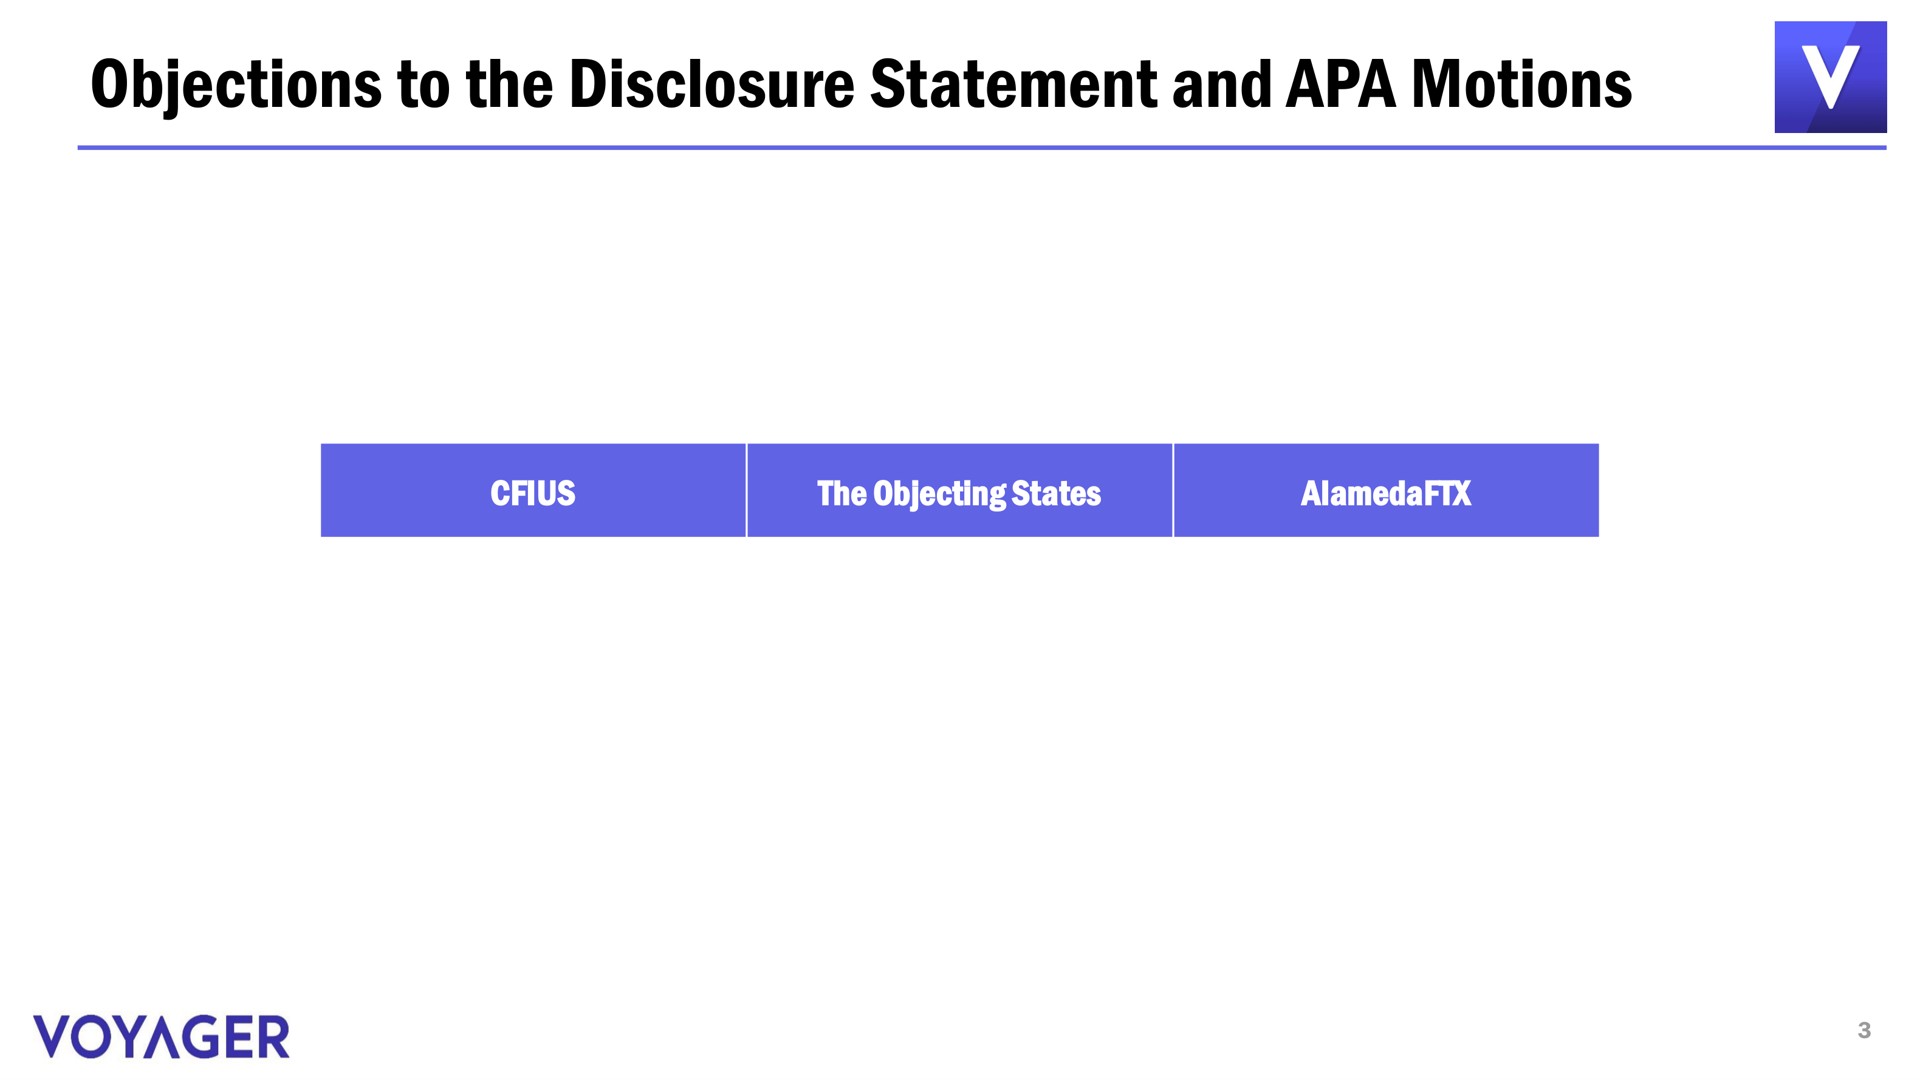 objections to the disclosure statement and apa motions voyager | Voyager Digital